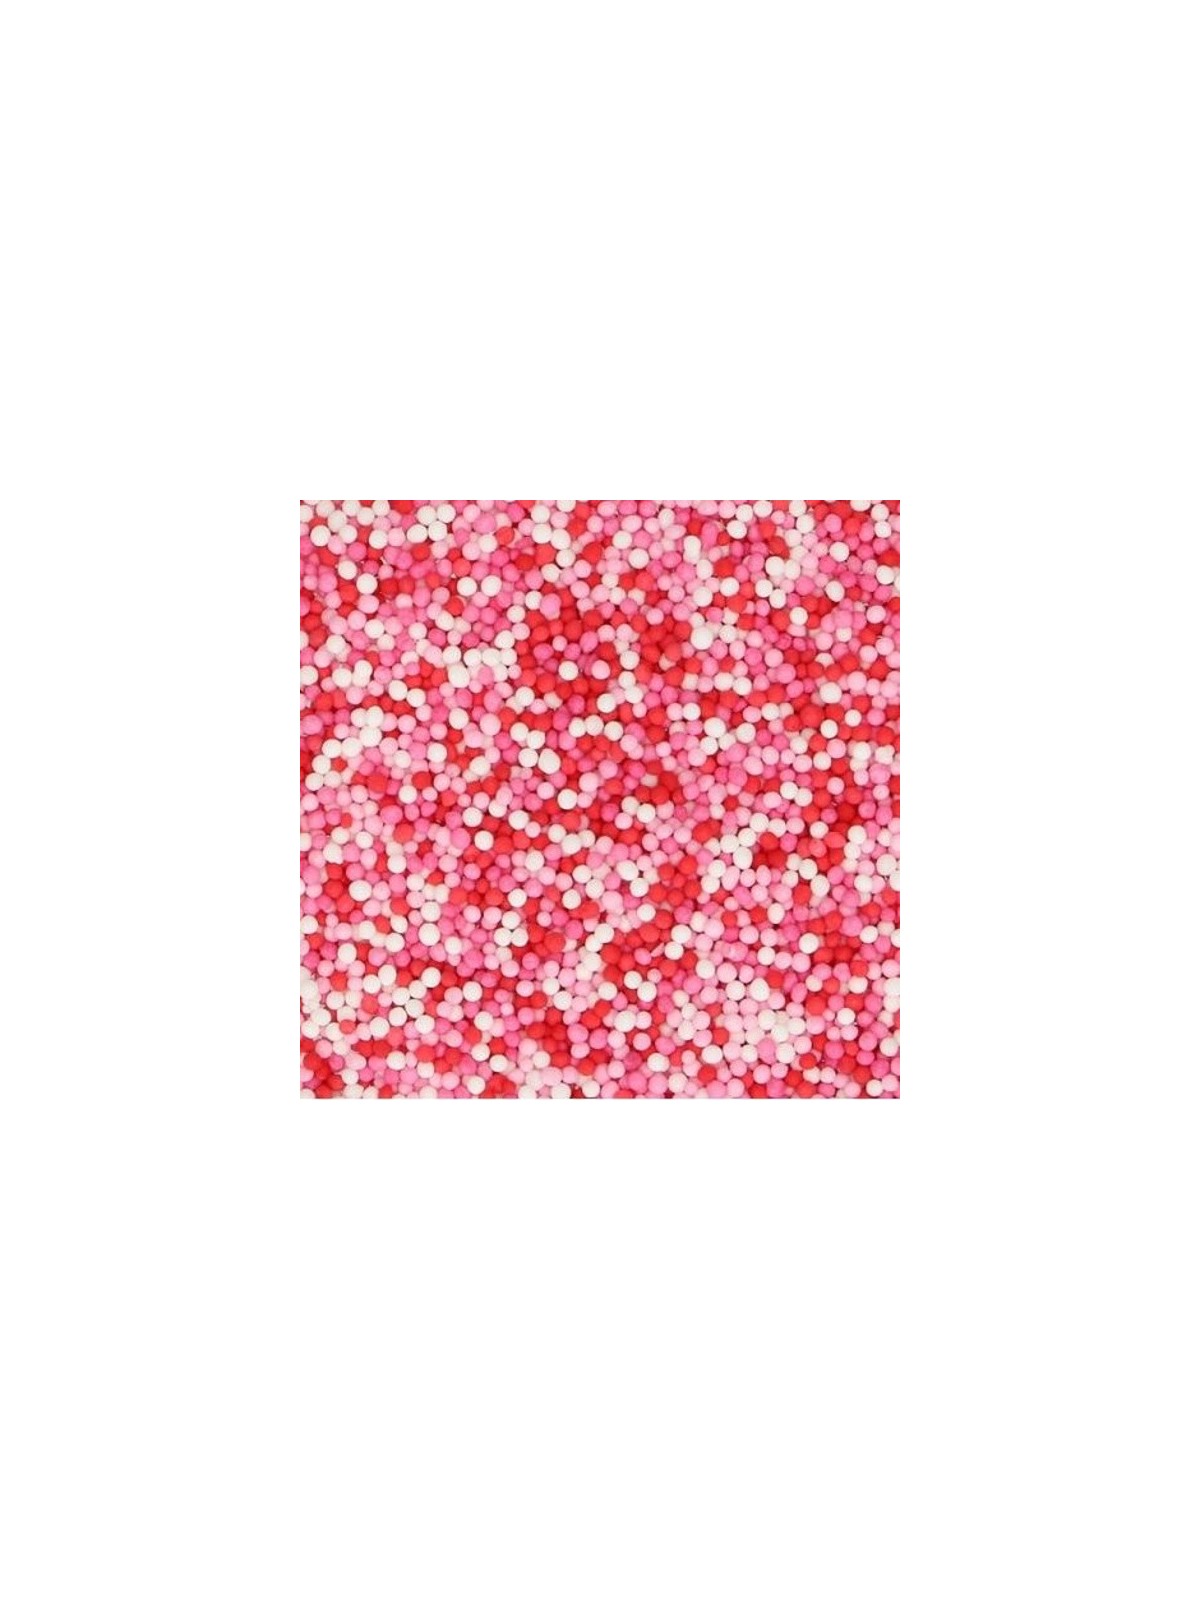 Nonpareils -Lots of Love- red / pink / white - 50g